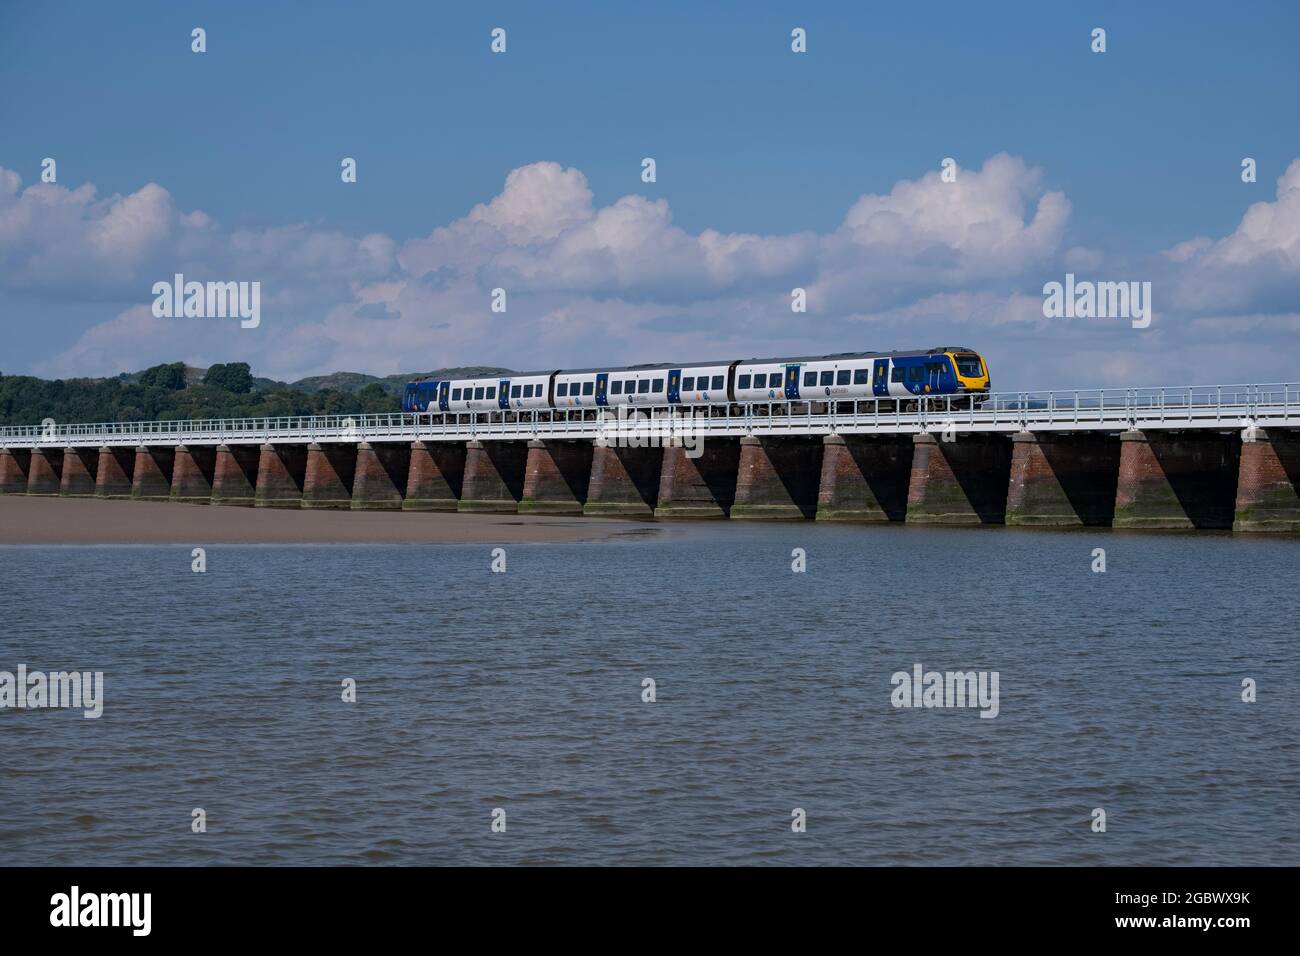 A train passes over the bridge spanning the estuary of the river Kent as it flows in to the sea at Arnside, Lancashire, England. Stock Photo